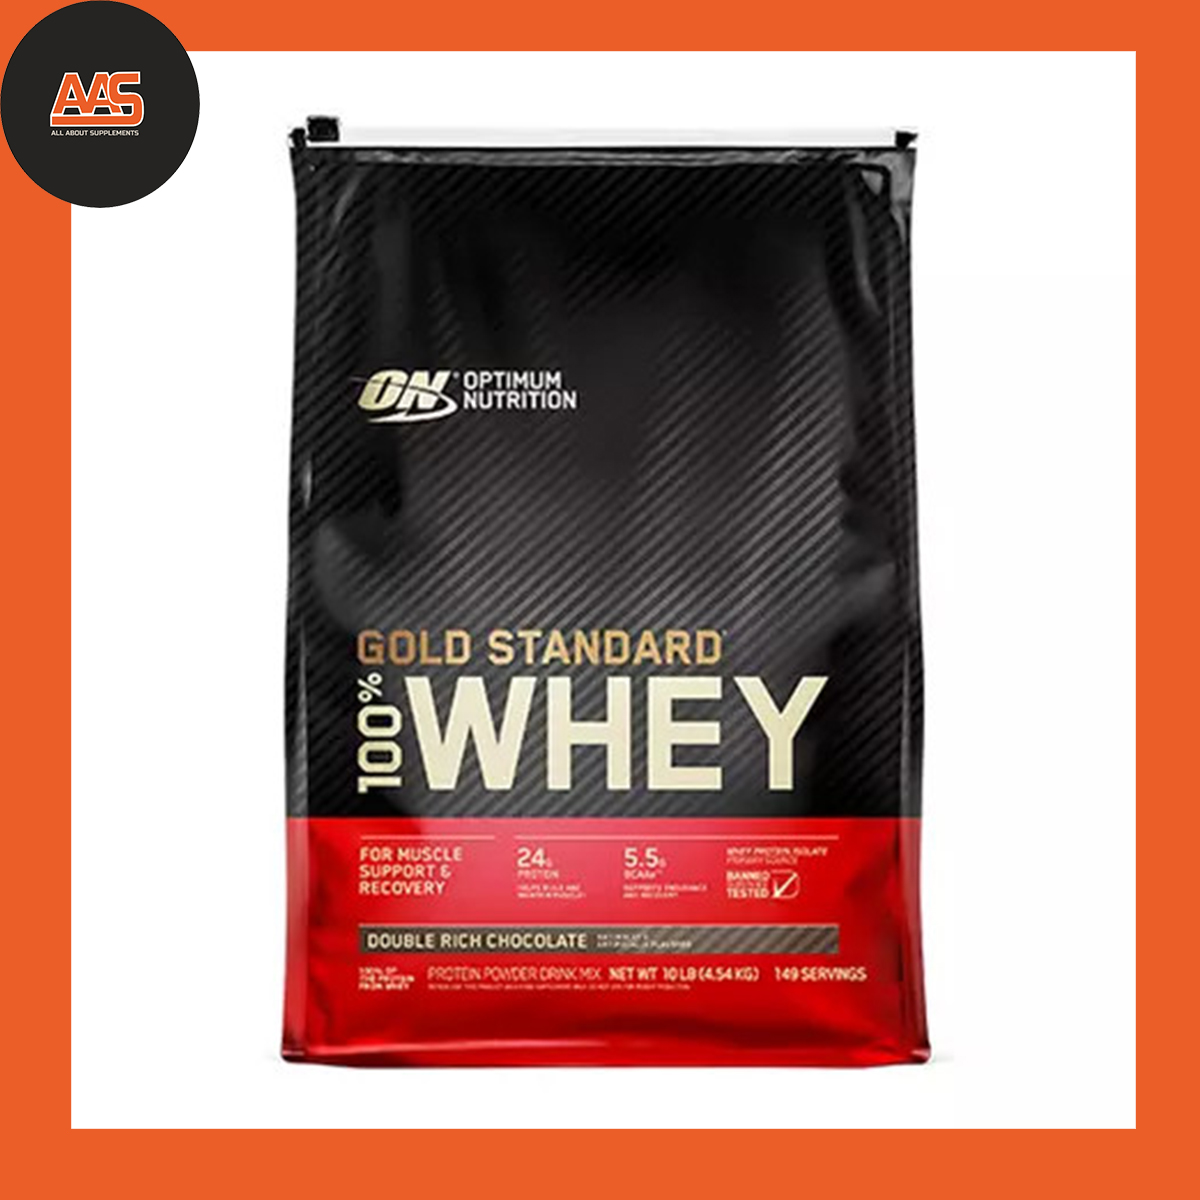 WHEY PROTEIN - OPTIMUM NUTRITION - GOLD STANDARD 100% WHEY - 10lbs